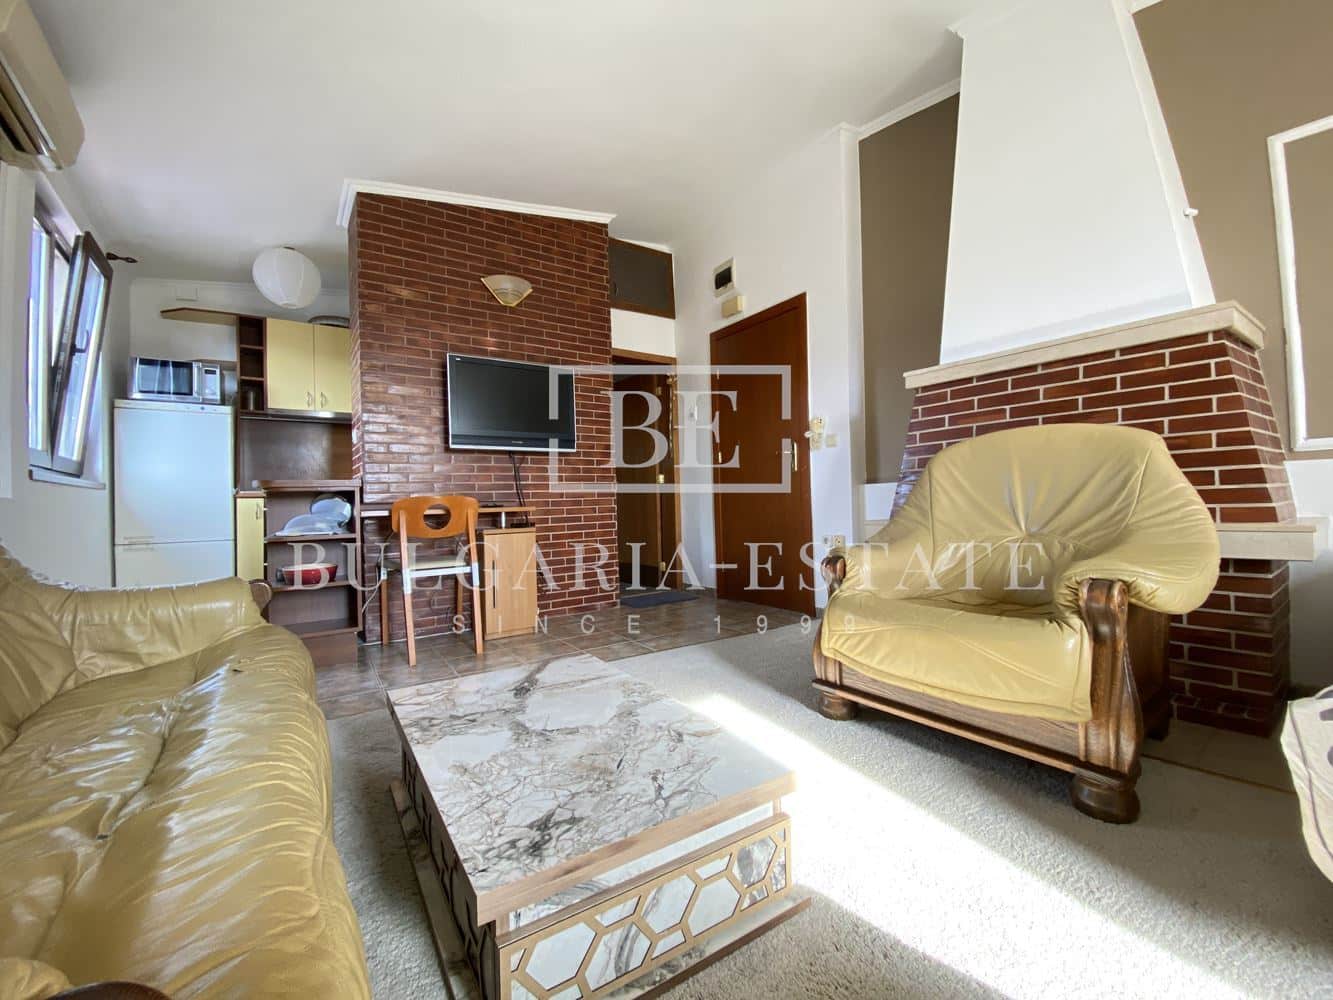 1-bedroom apartment for rent in VINS, next to hotel "GRAFIT", internet+TV, possibility for short-term rent - 0